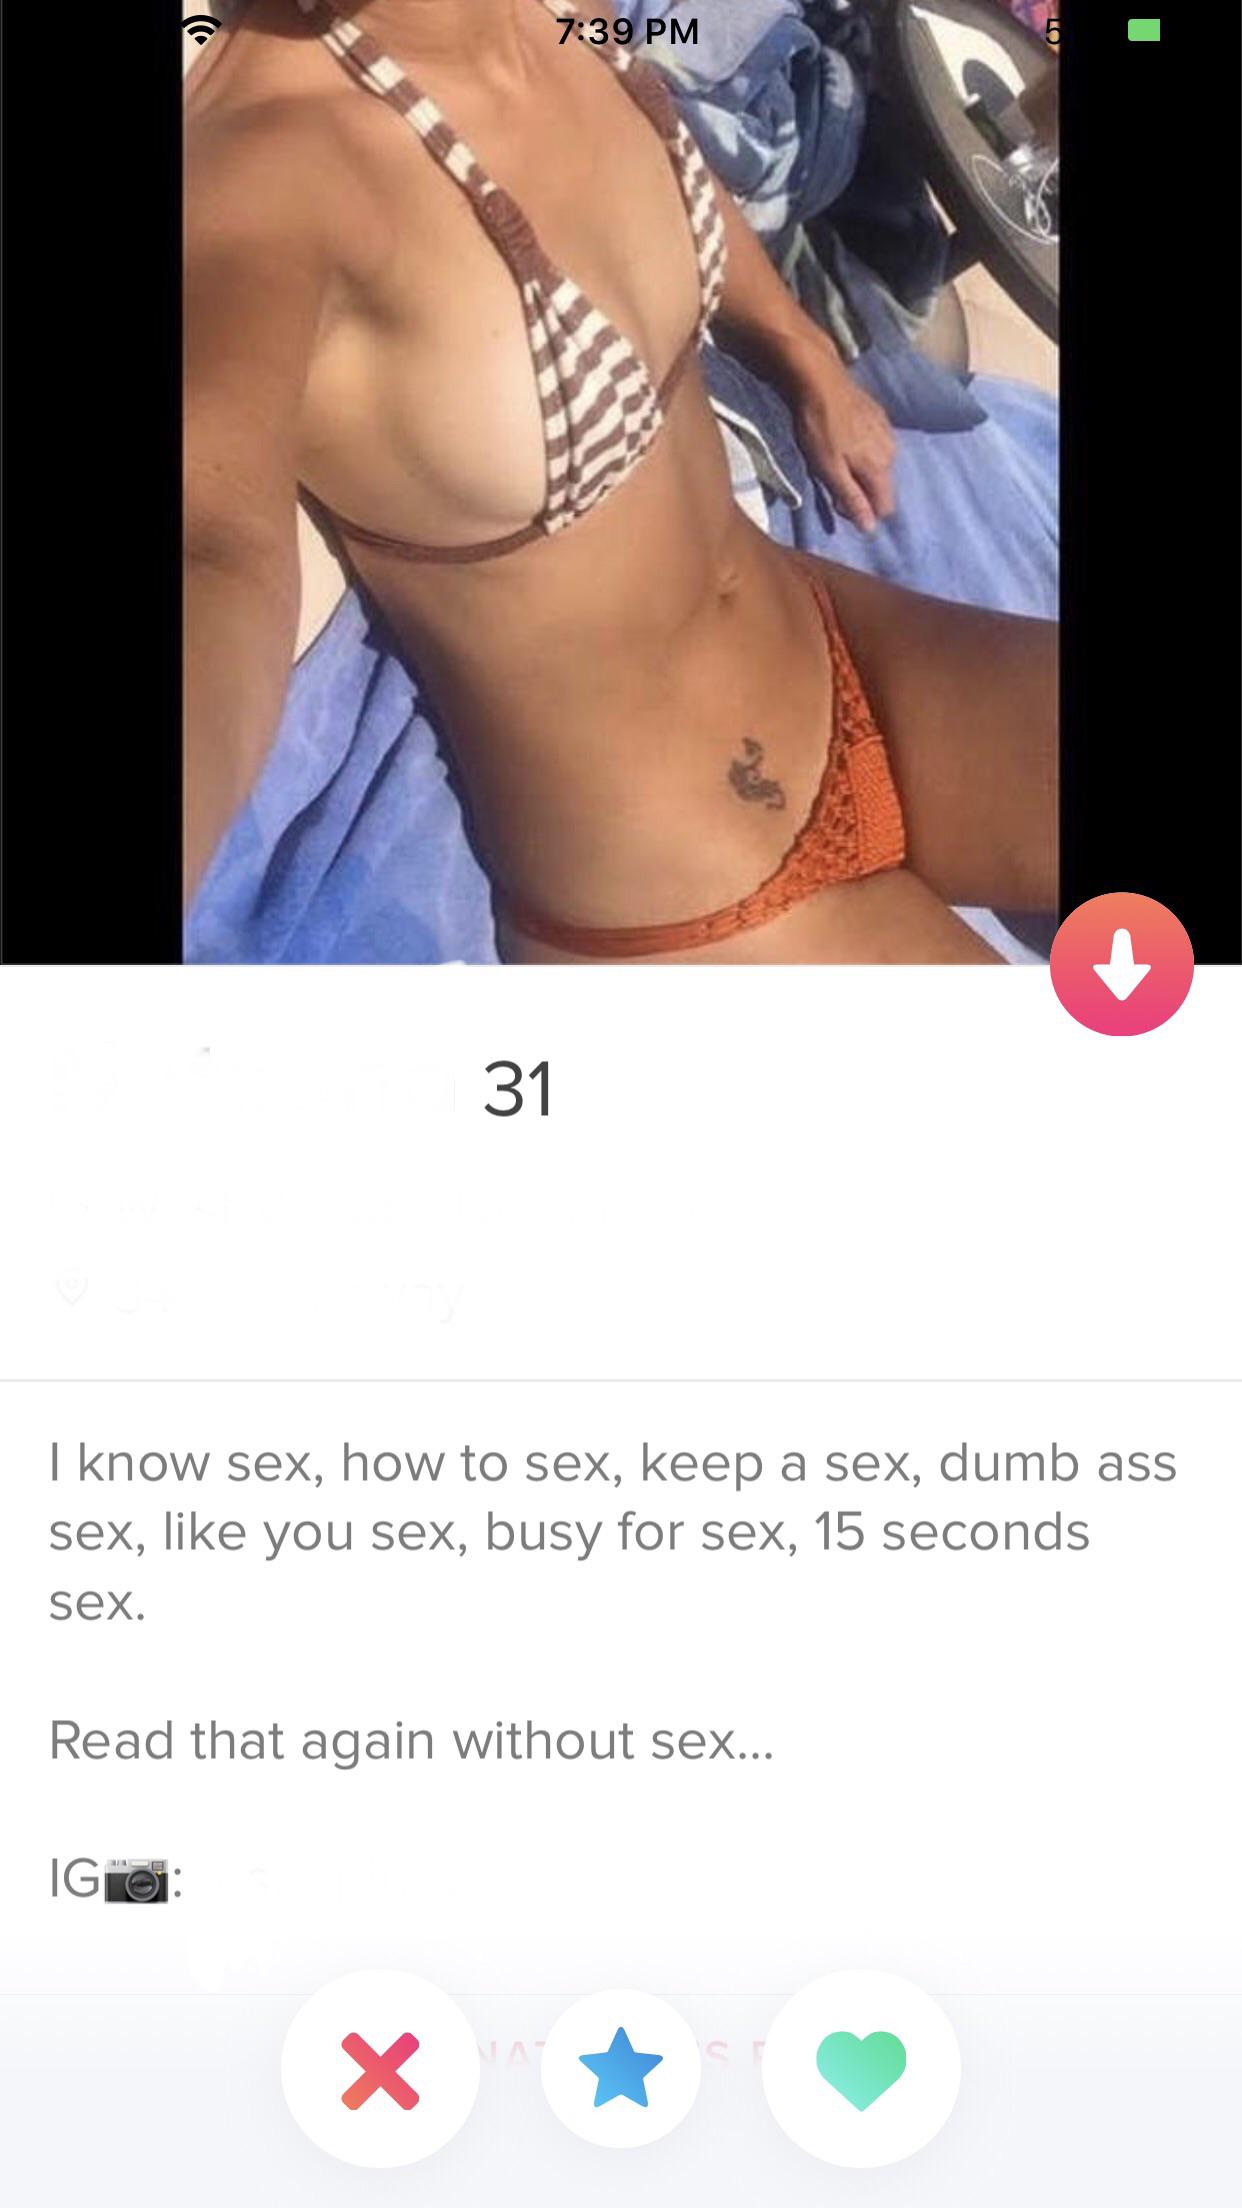 shameless tinder - I know sex, how to sex, keep a sex, dumb ass sex, you sex, busy for sex, 15 seconds sex. Read that again without sex... Igo